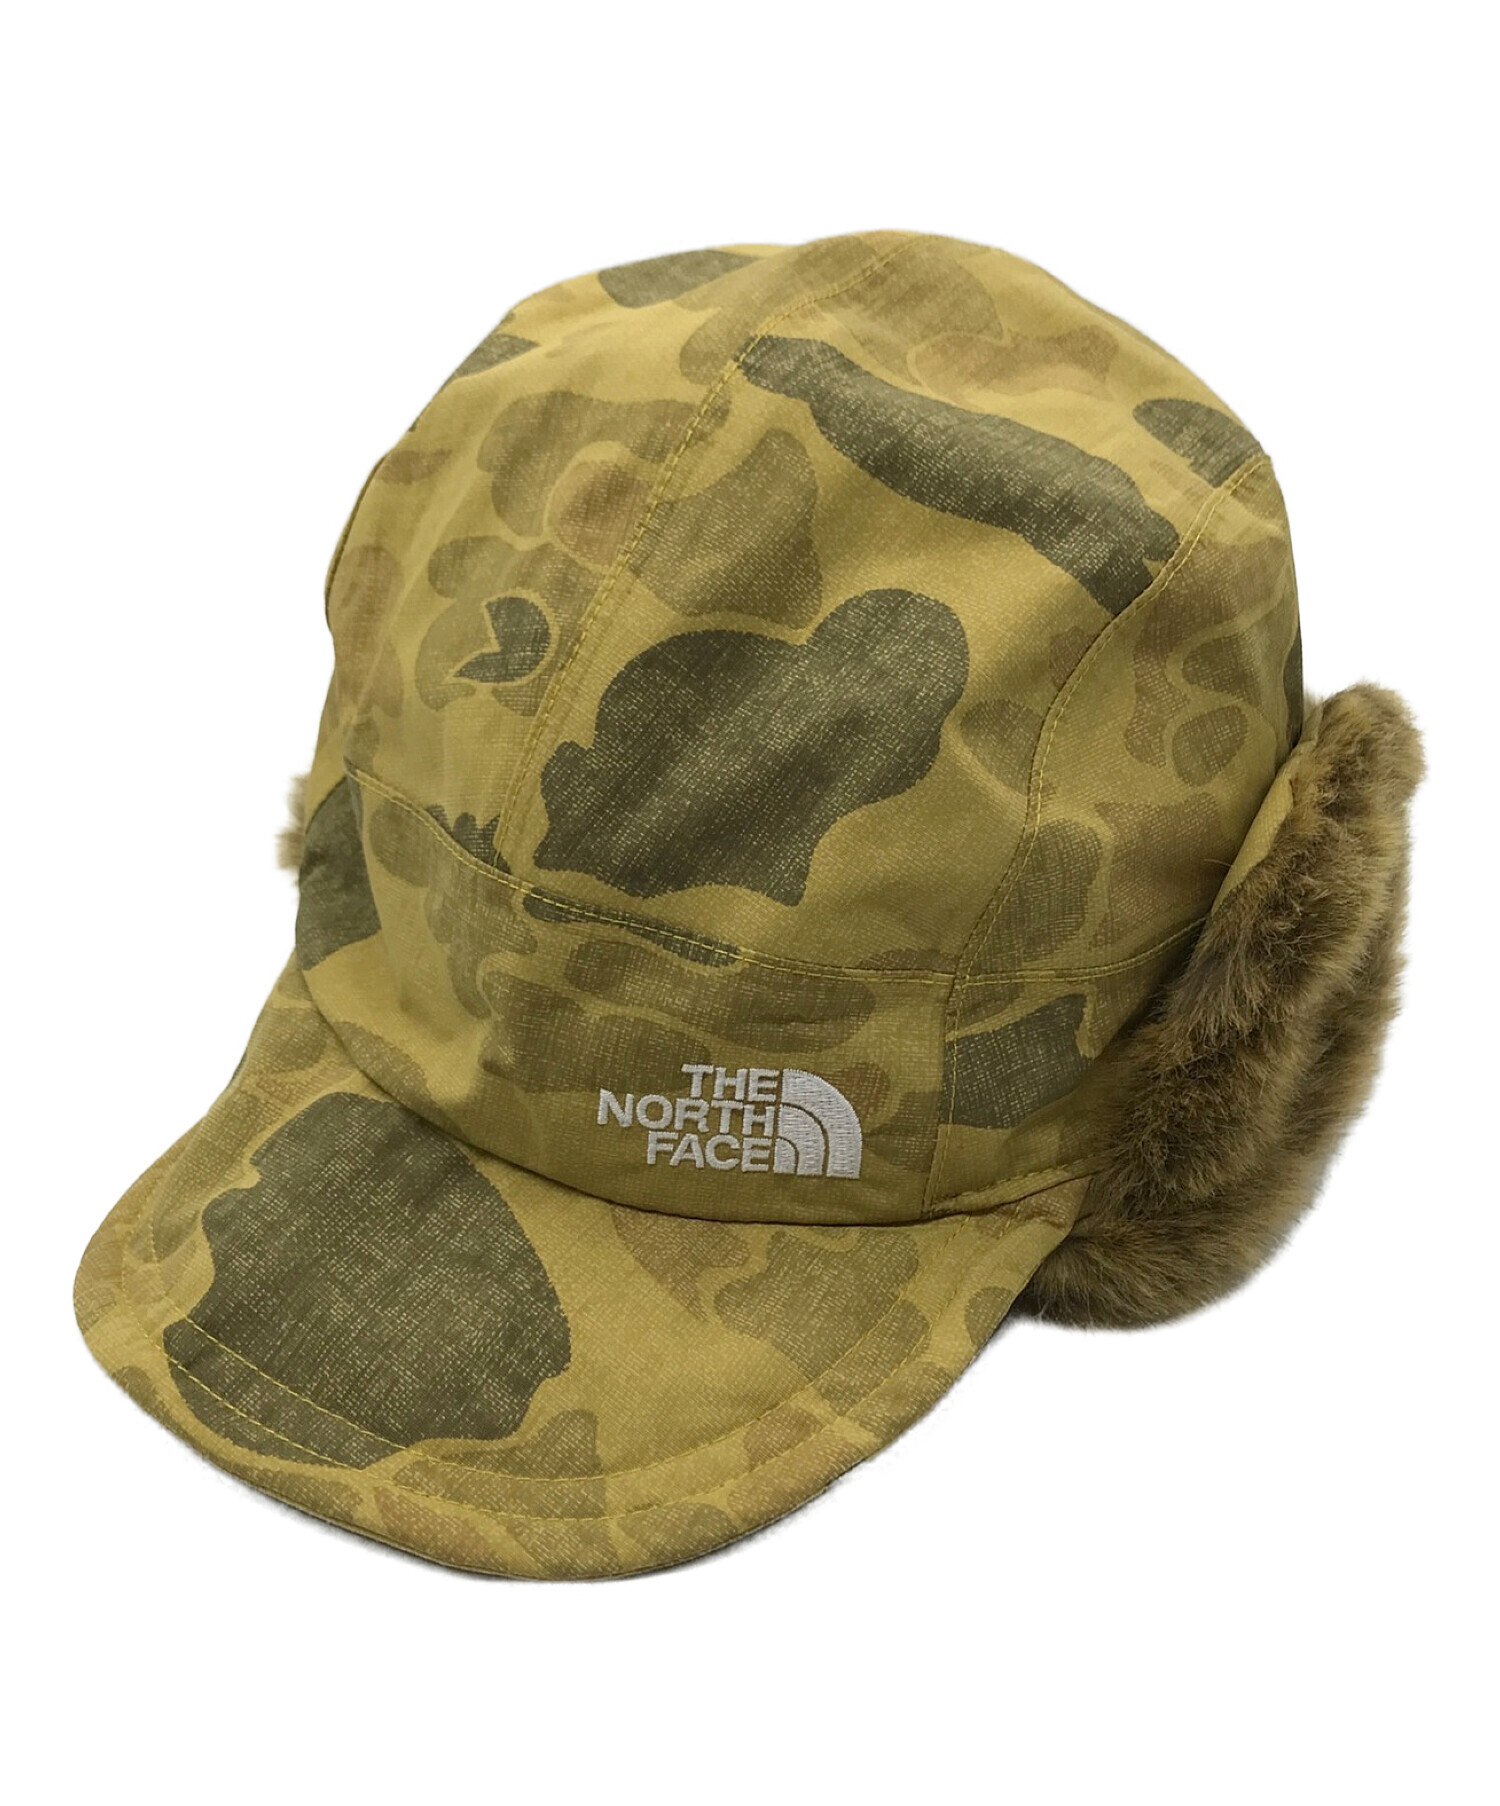 【THE NORTH FACE】Frontier Cap  size L